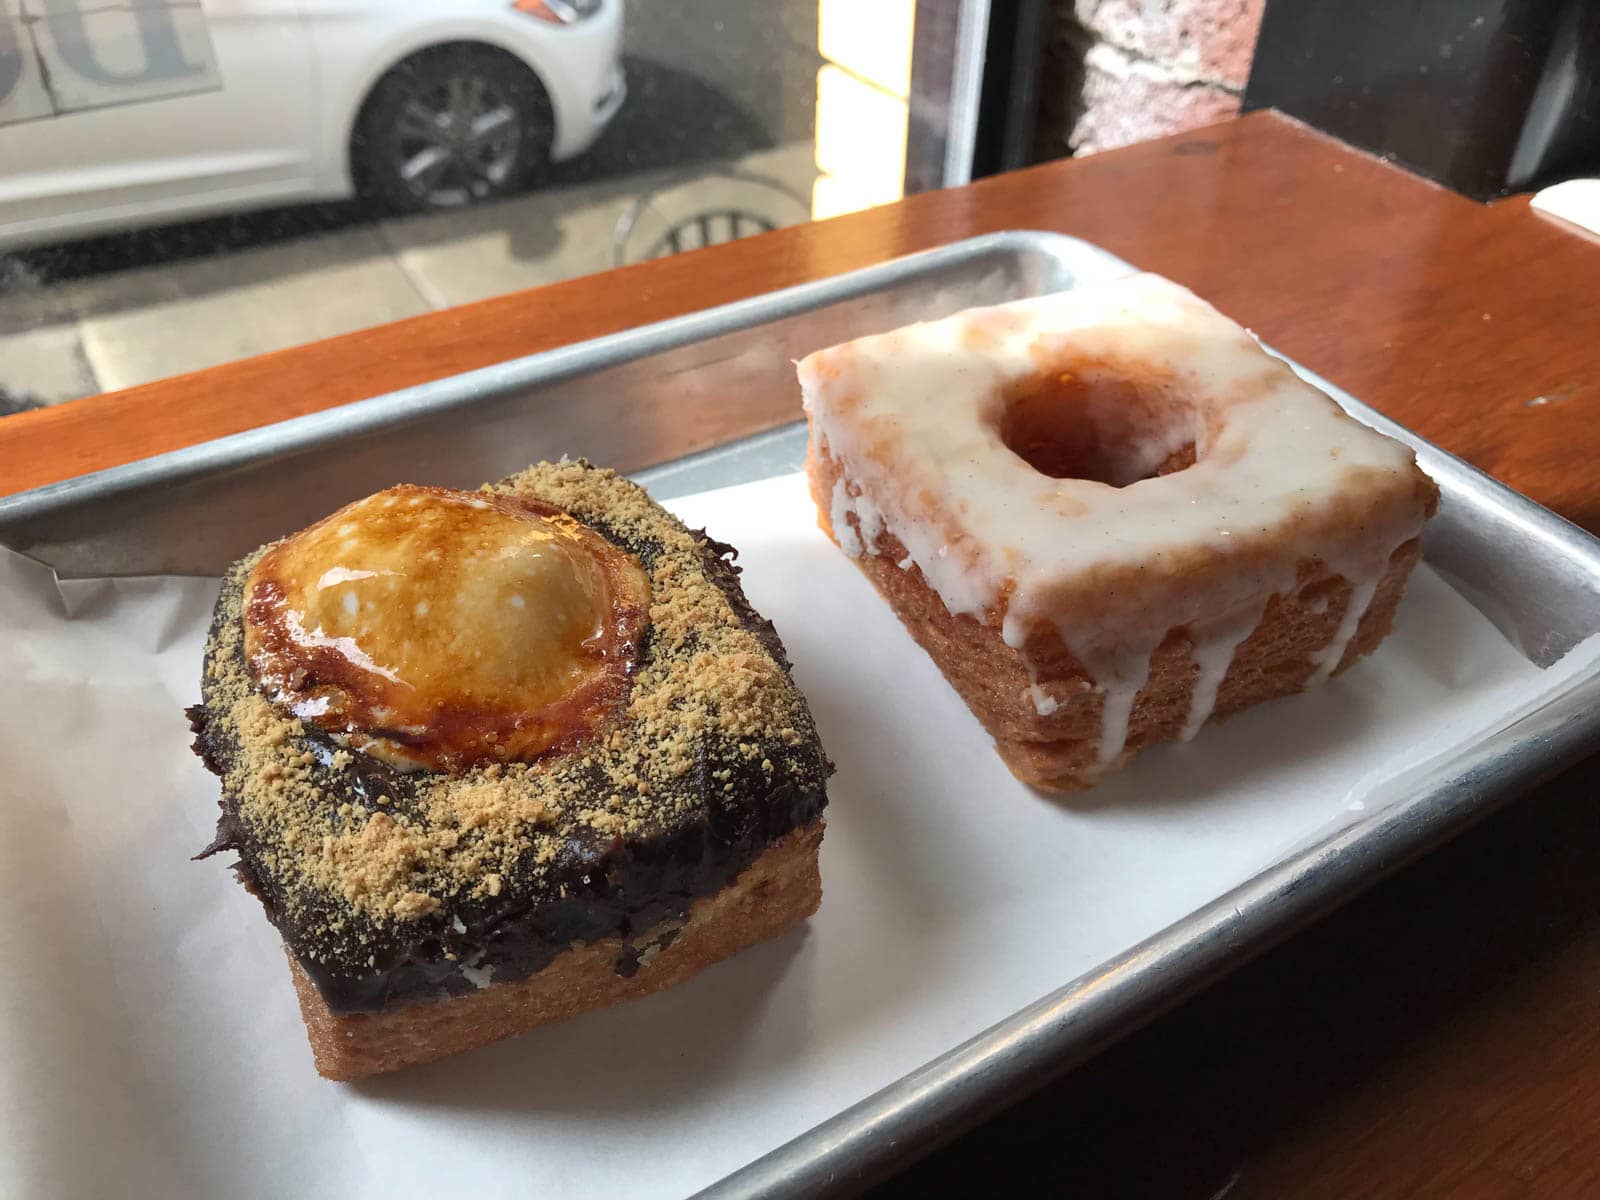 Two square cronuts (croissant doughnuts) in a silver tray. One has a white frosted glaze while the other one has a chocolate and caramel topping